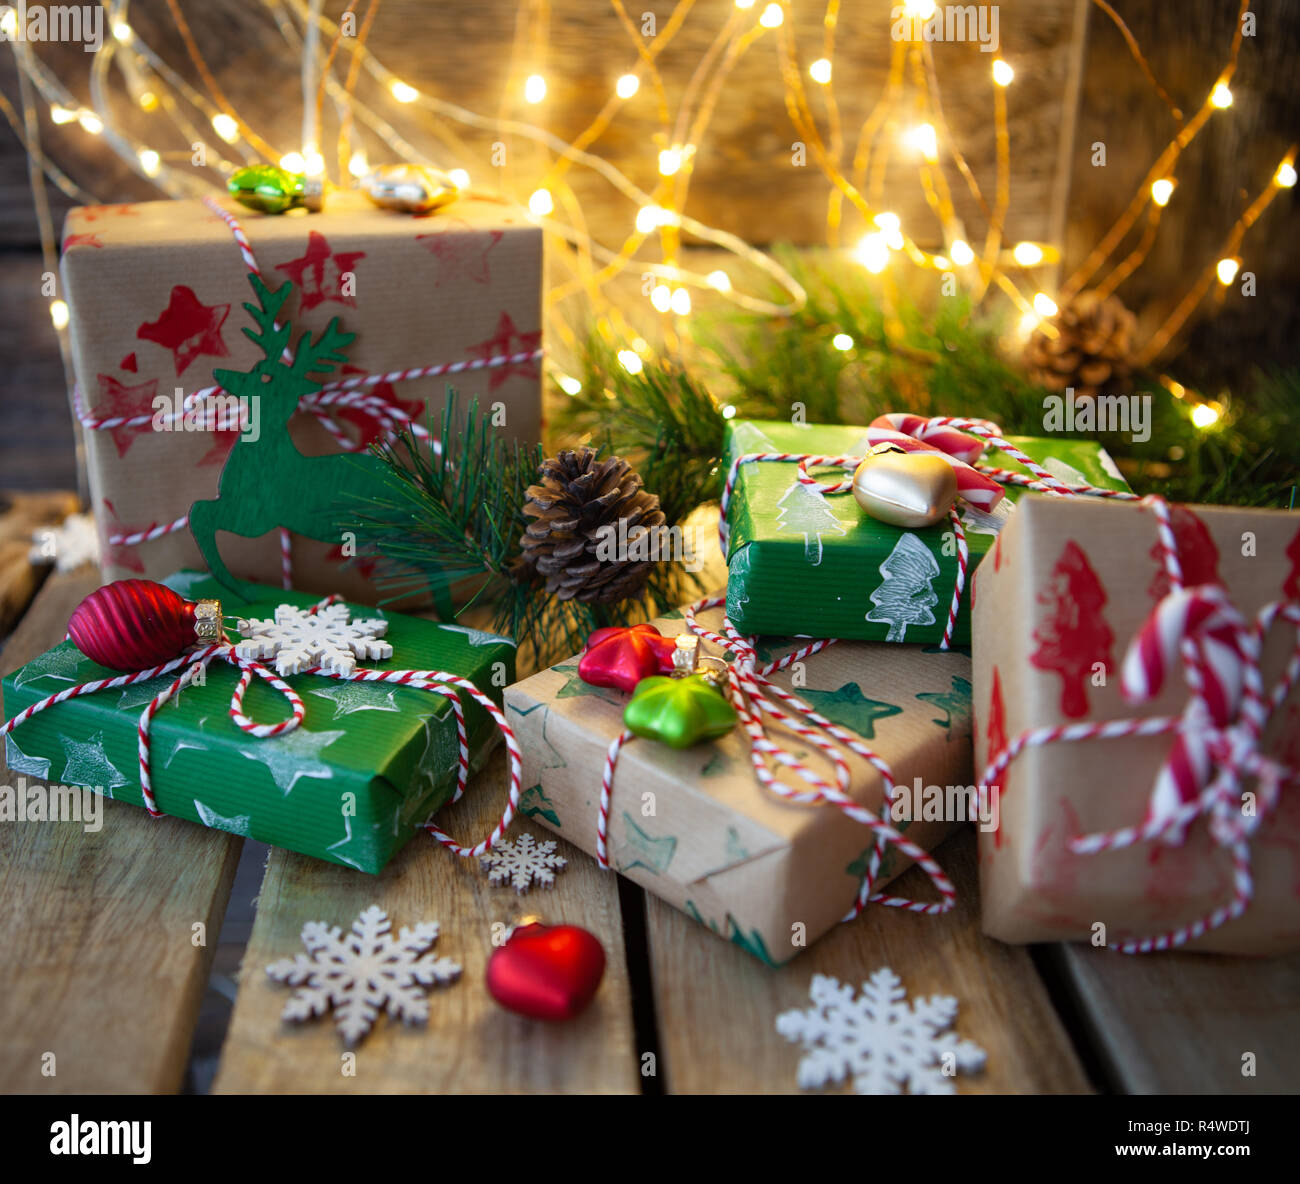 Little wrapped presents and festive lights for a Merry Christmas / Happy Holidays Stock Photo